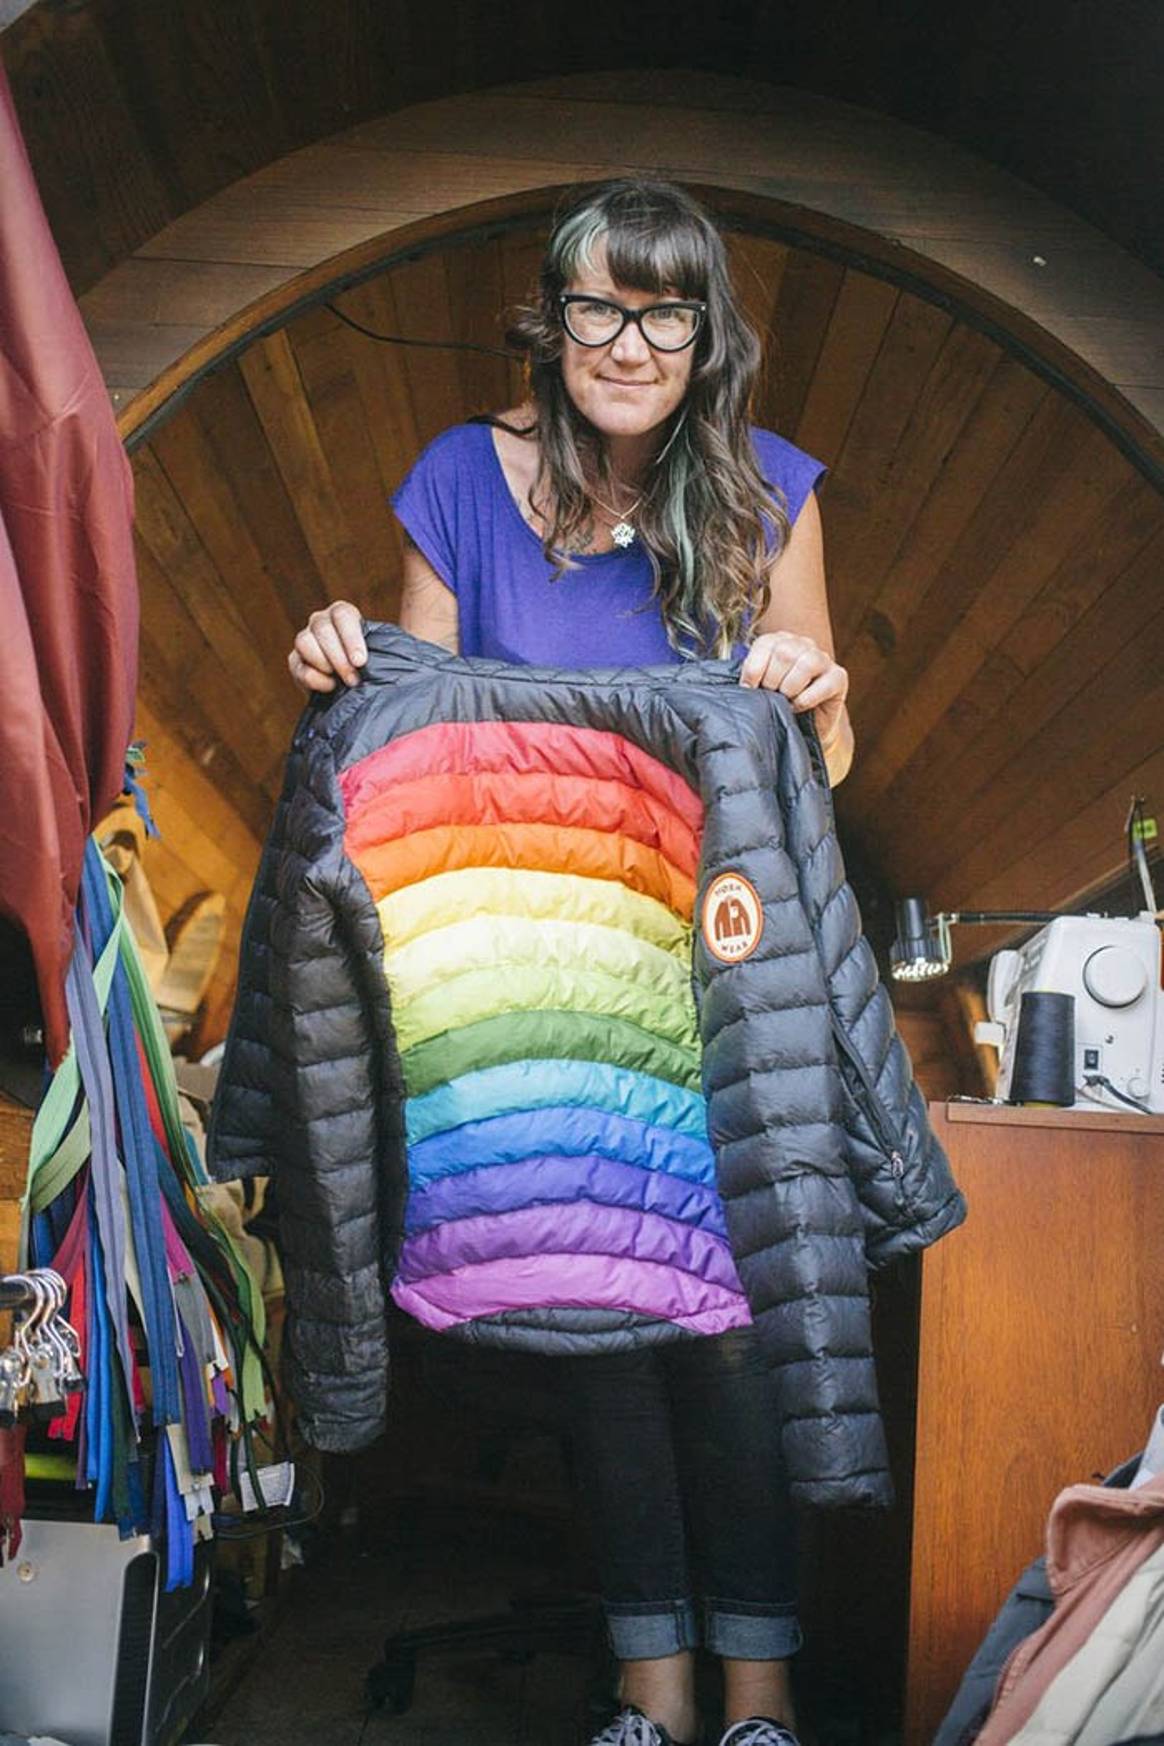 Patagonia to launch ‘Worn Wear Tour’ in Europe